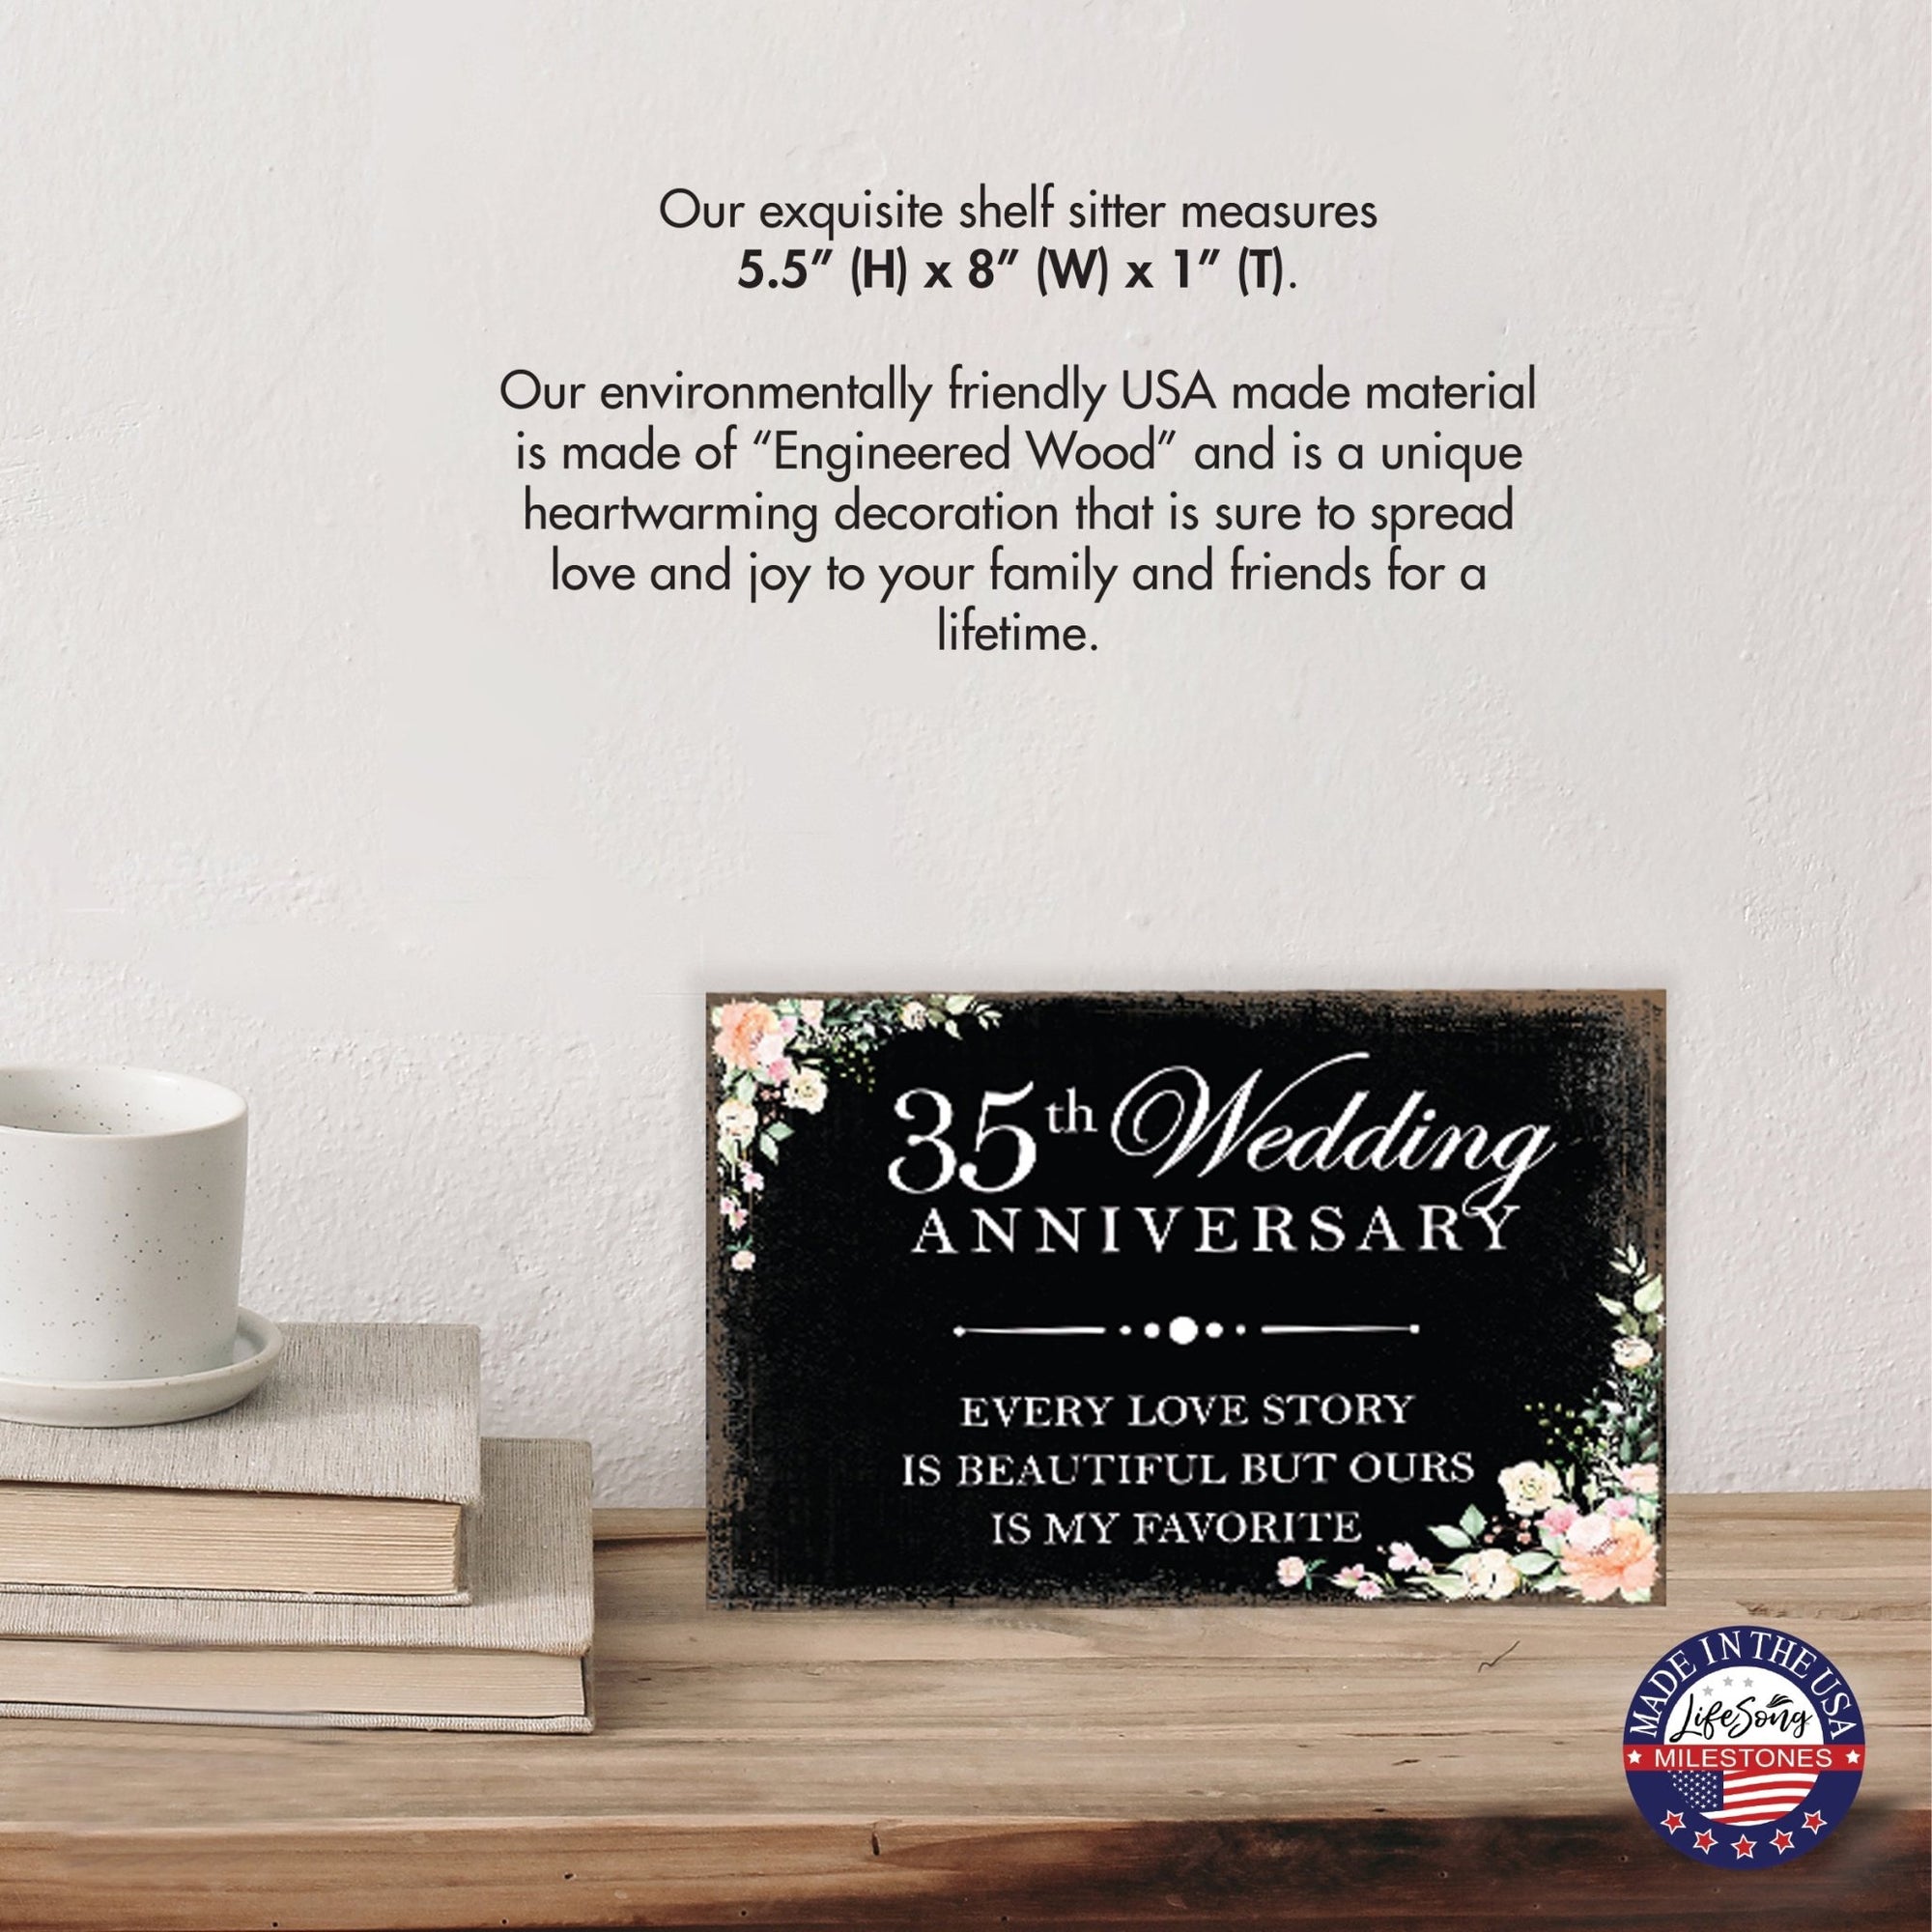 35th Wedding Anniversary Unique Shelf Decor and Tabletop Signs Gift for Couples - Every Love Story - LifeSong Milestones